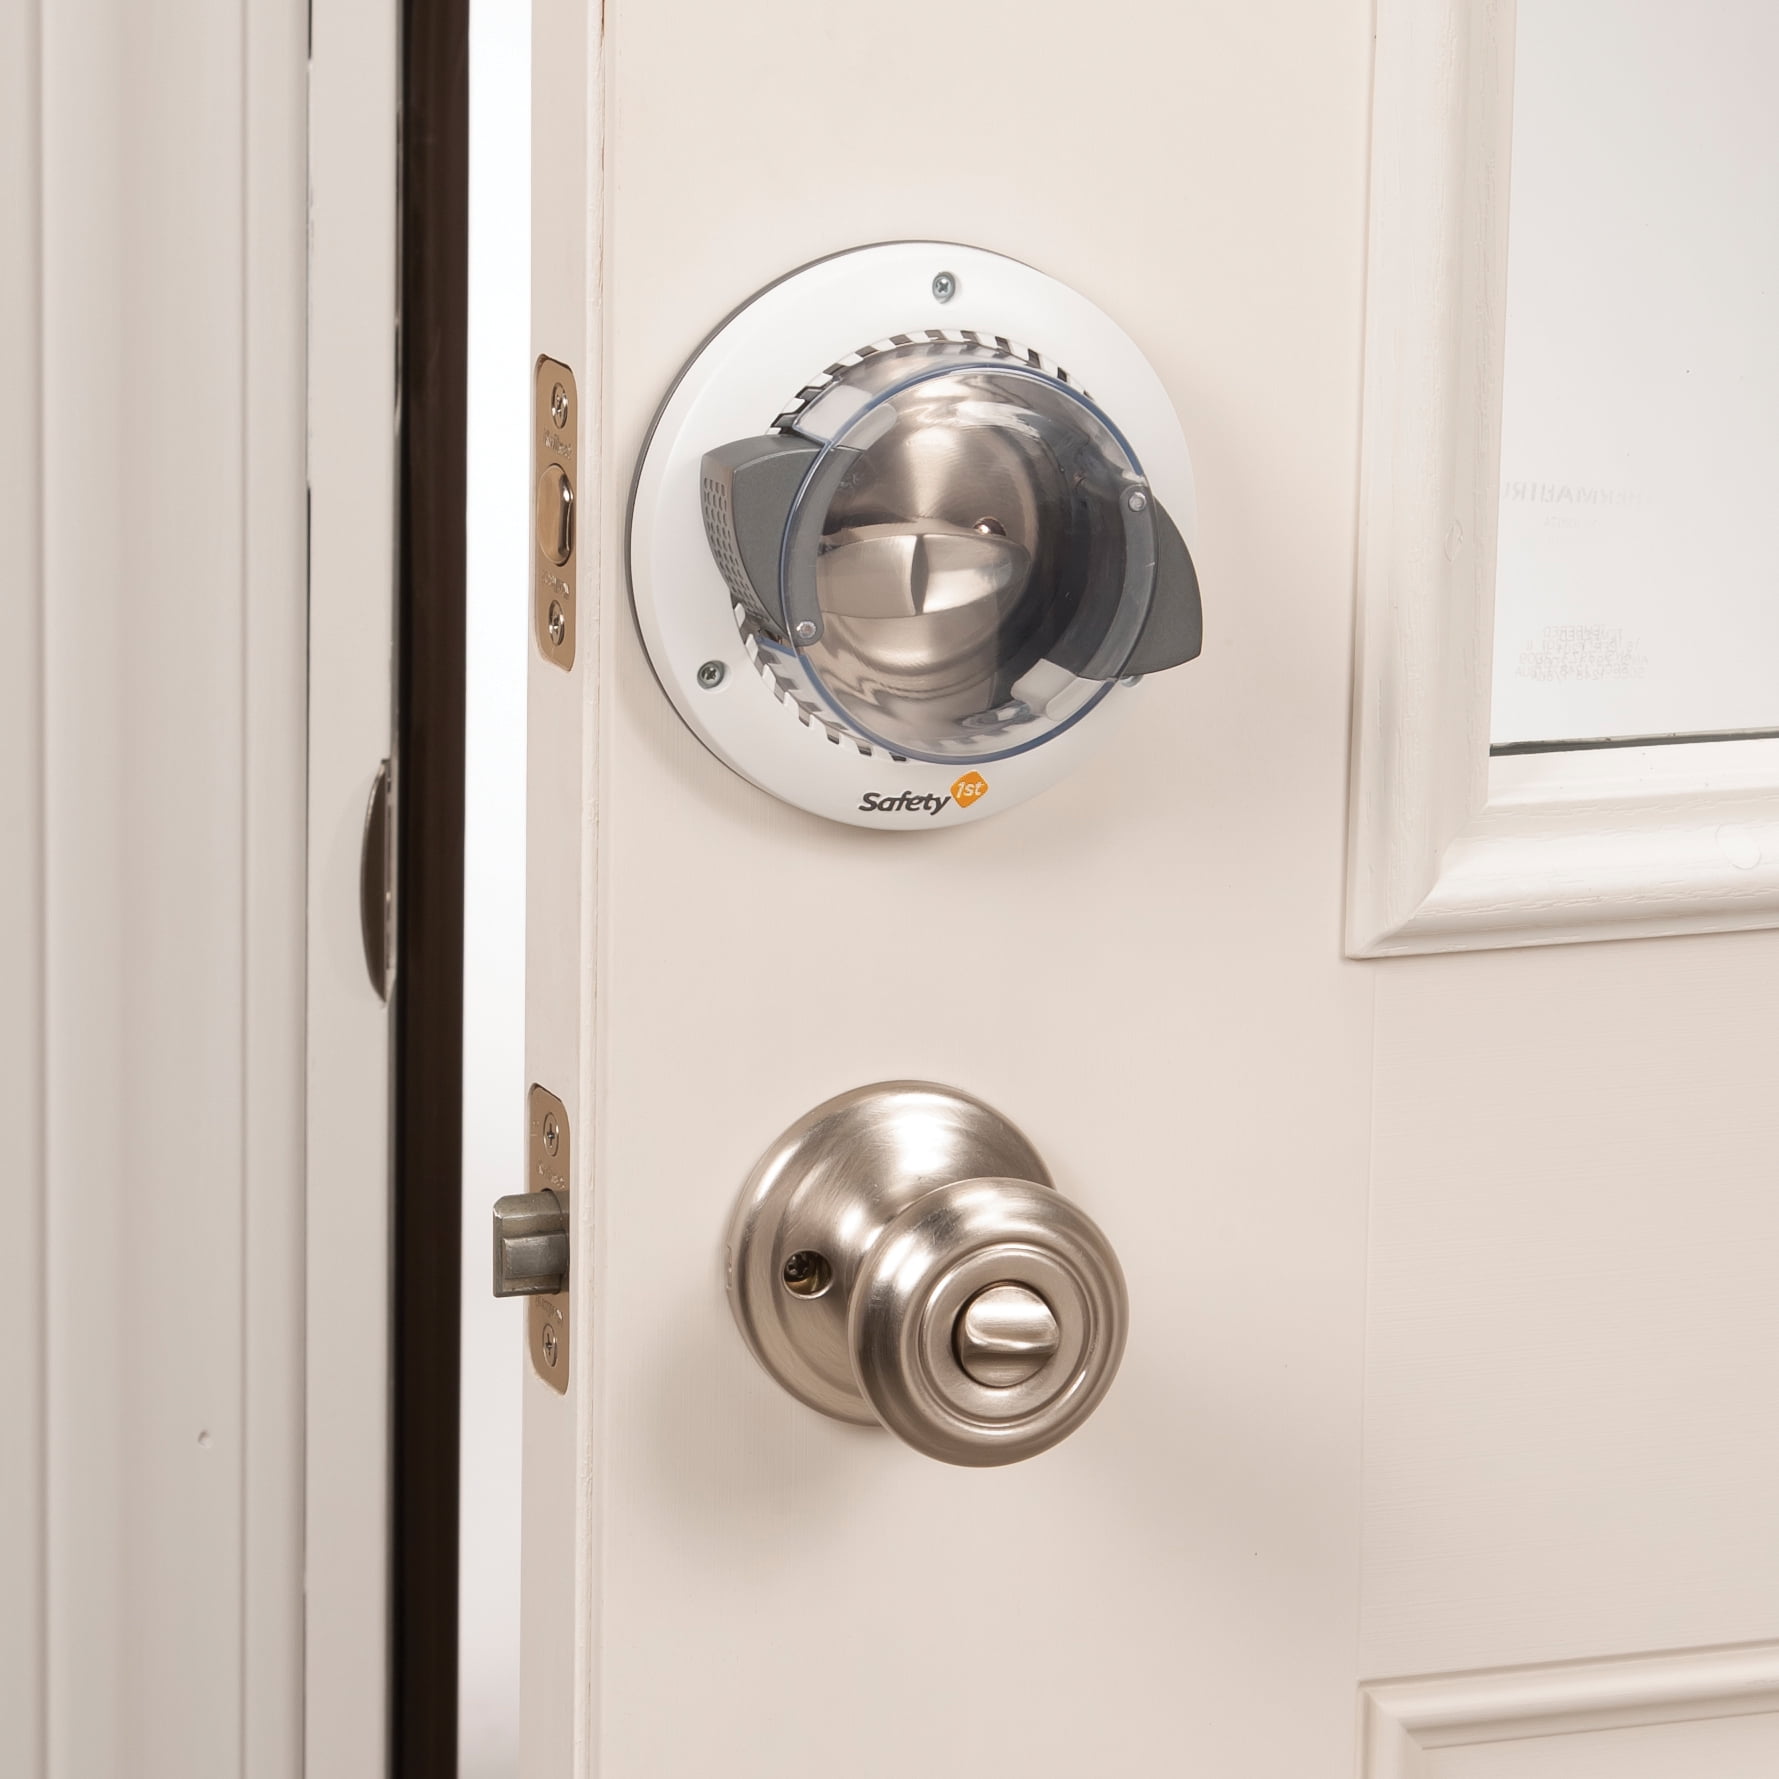 Safety 1st Folding Door Lock Fits On All Doors Up To 1.125” Wide